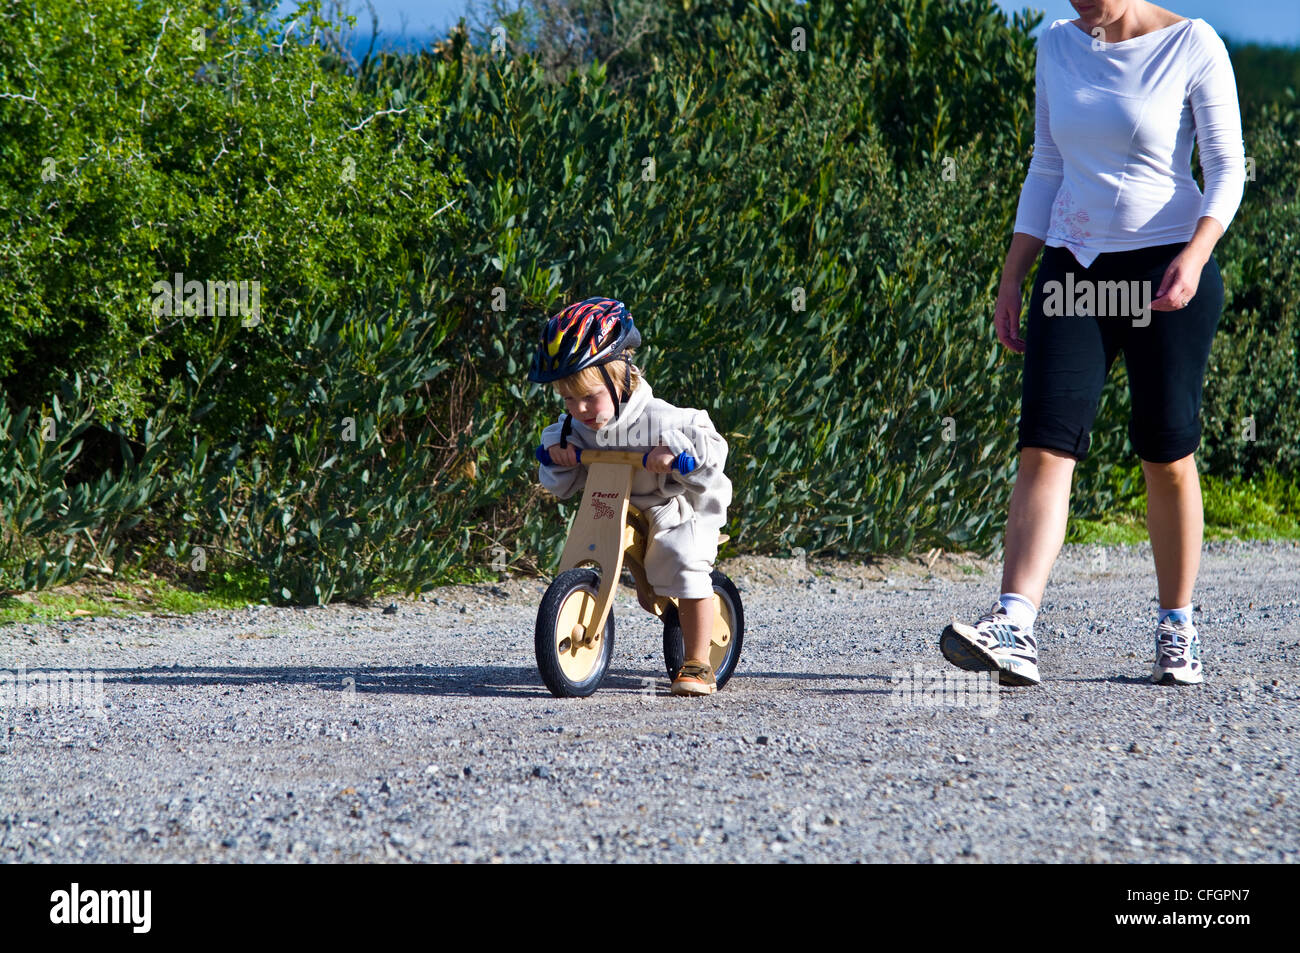 A young boy learns to ride a balance bike made from recycled timber. Stock Photo